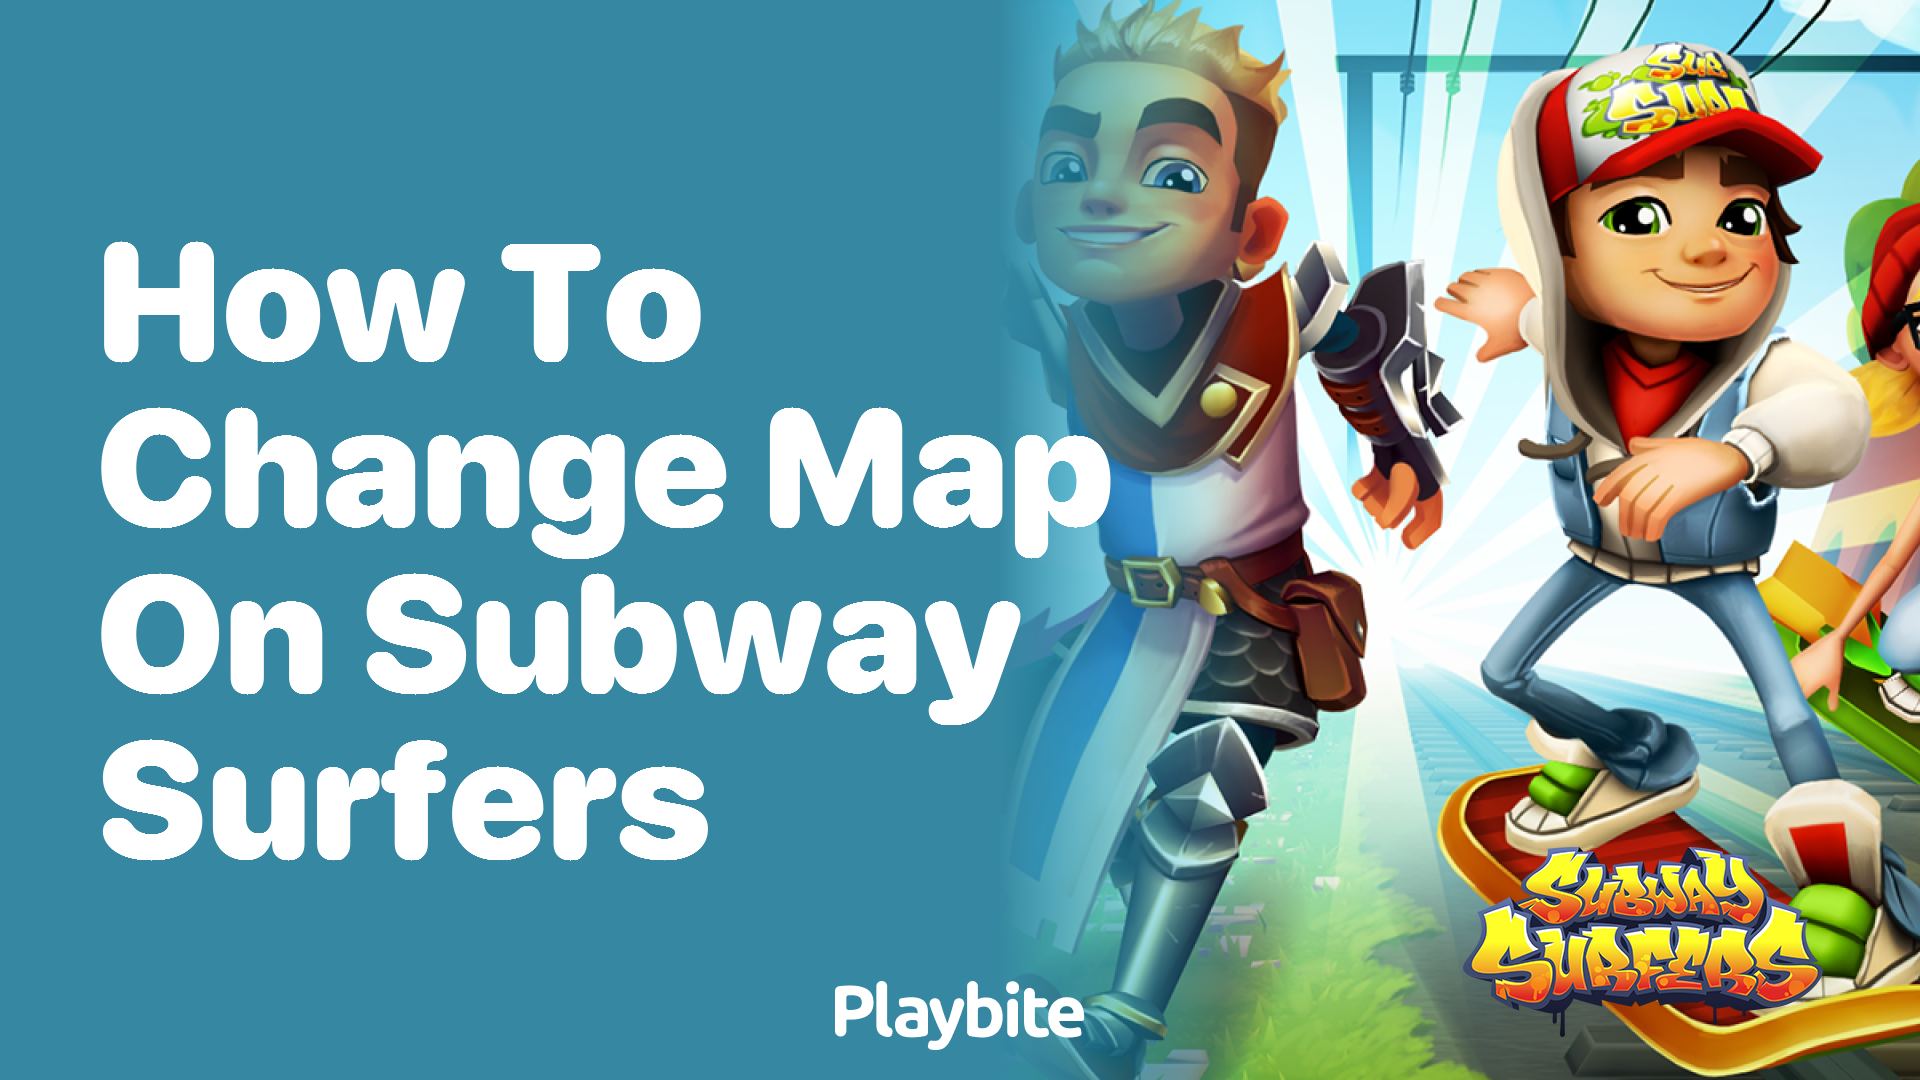 How to Change Map on Subway Surfers